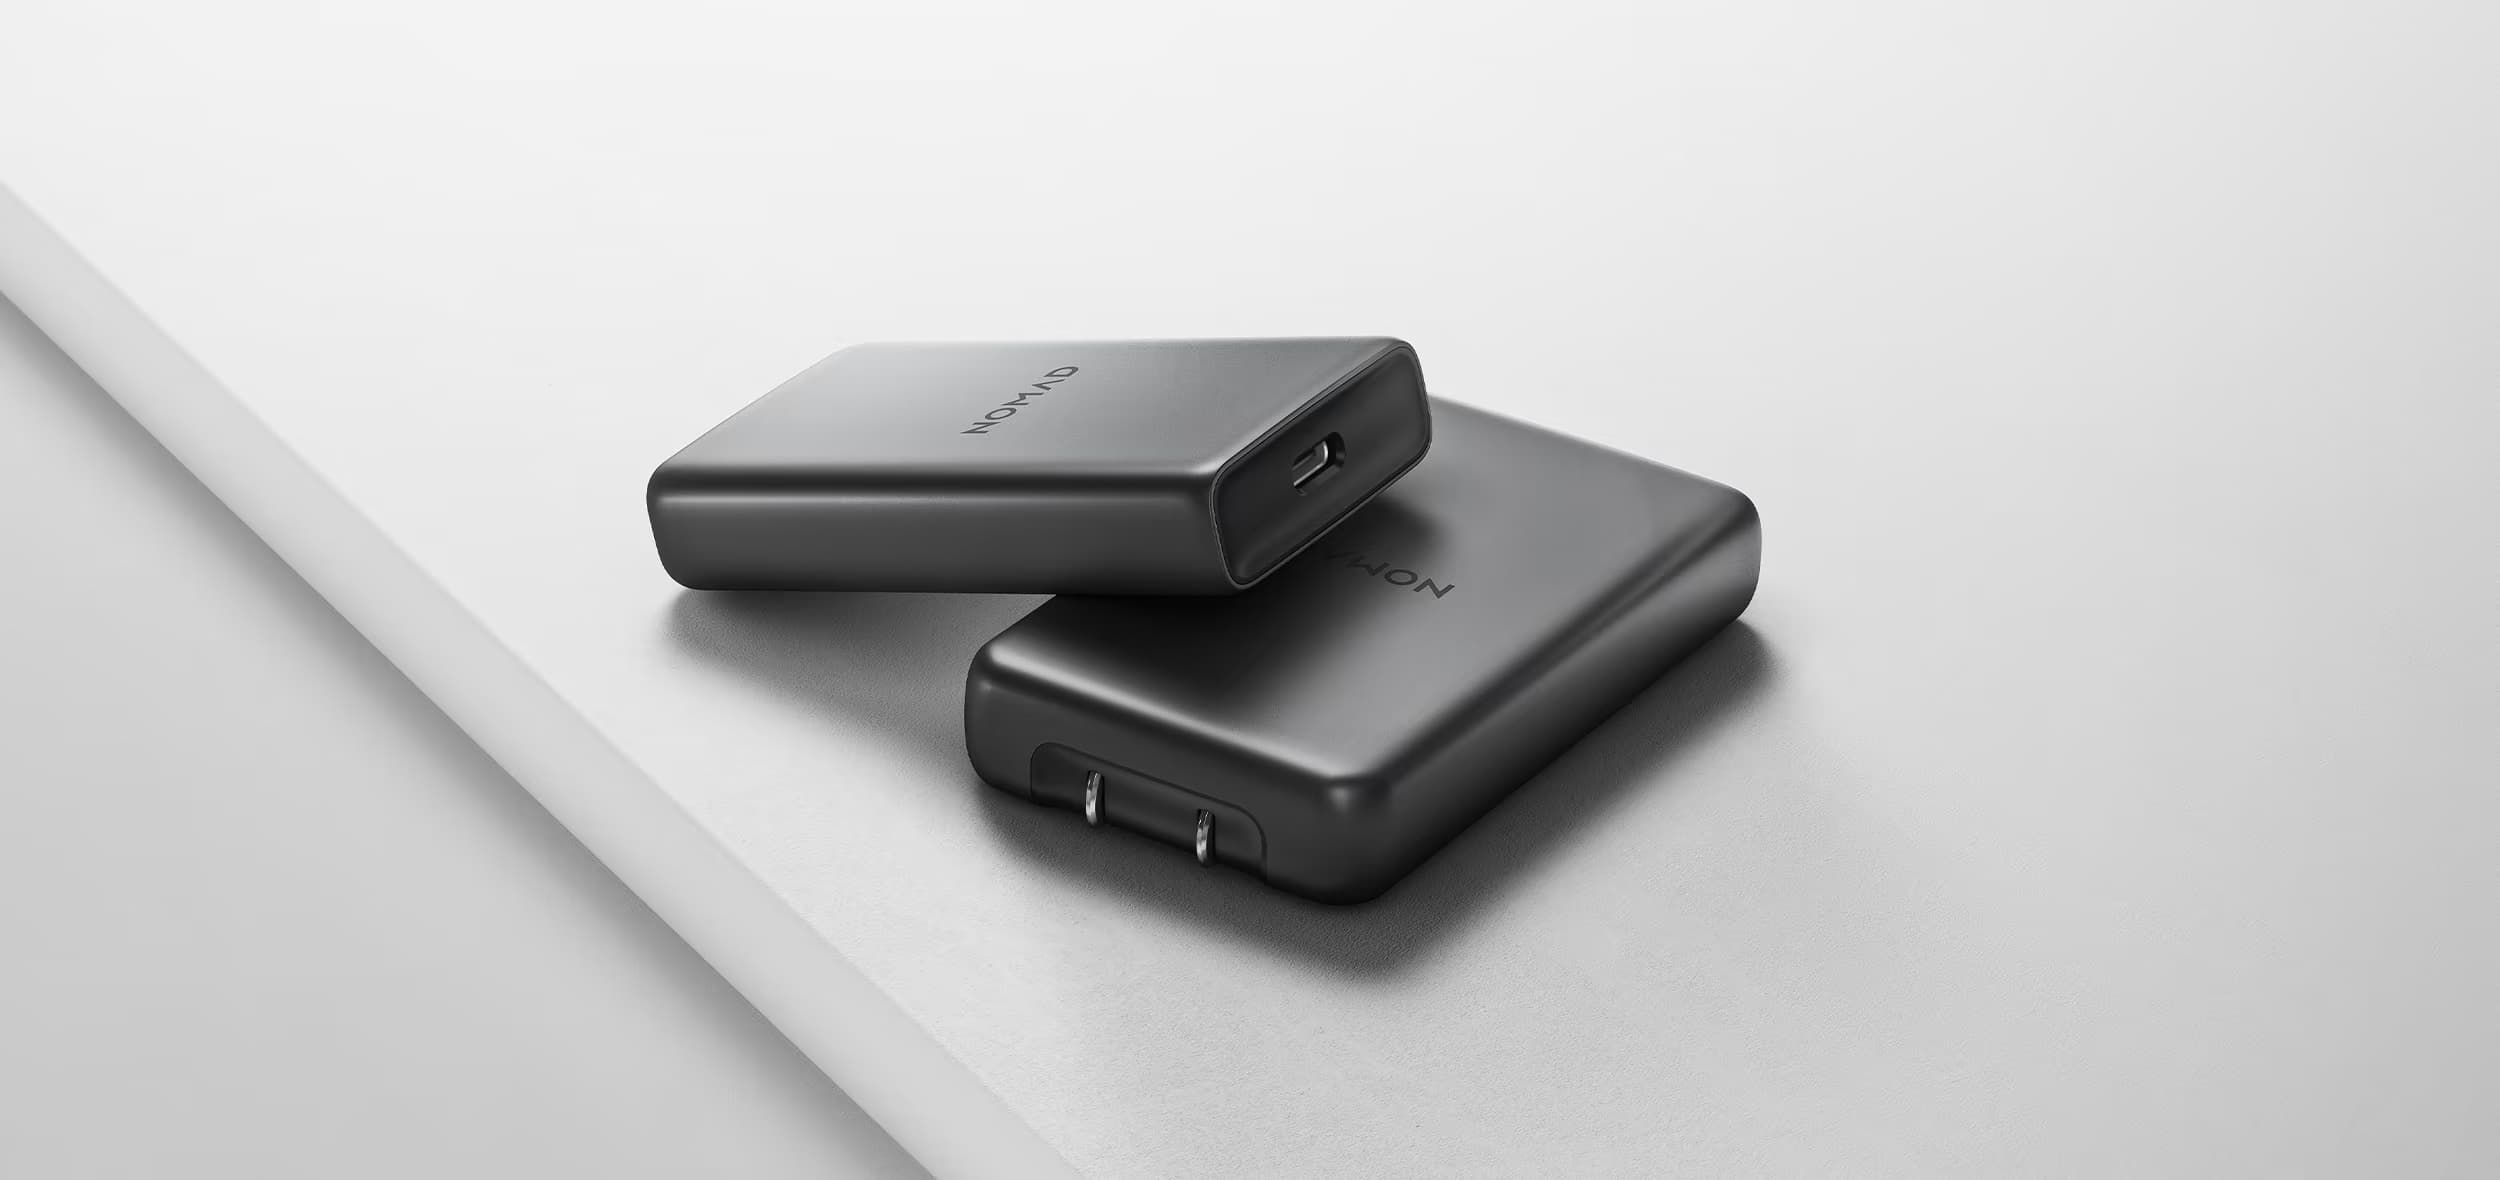 Nomad’s new slim power adapters easily slip into travel bag pockets & fit behind couches